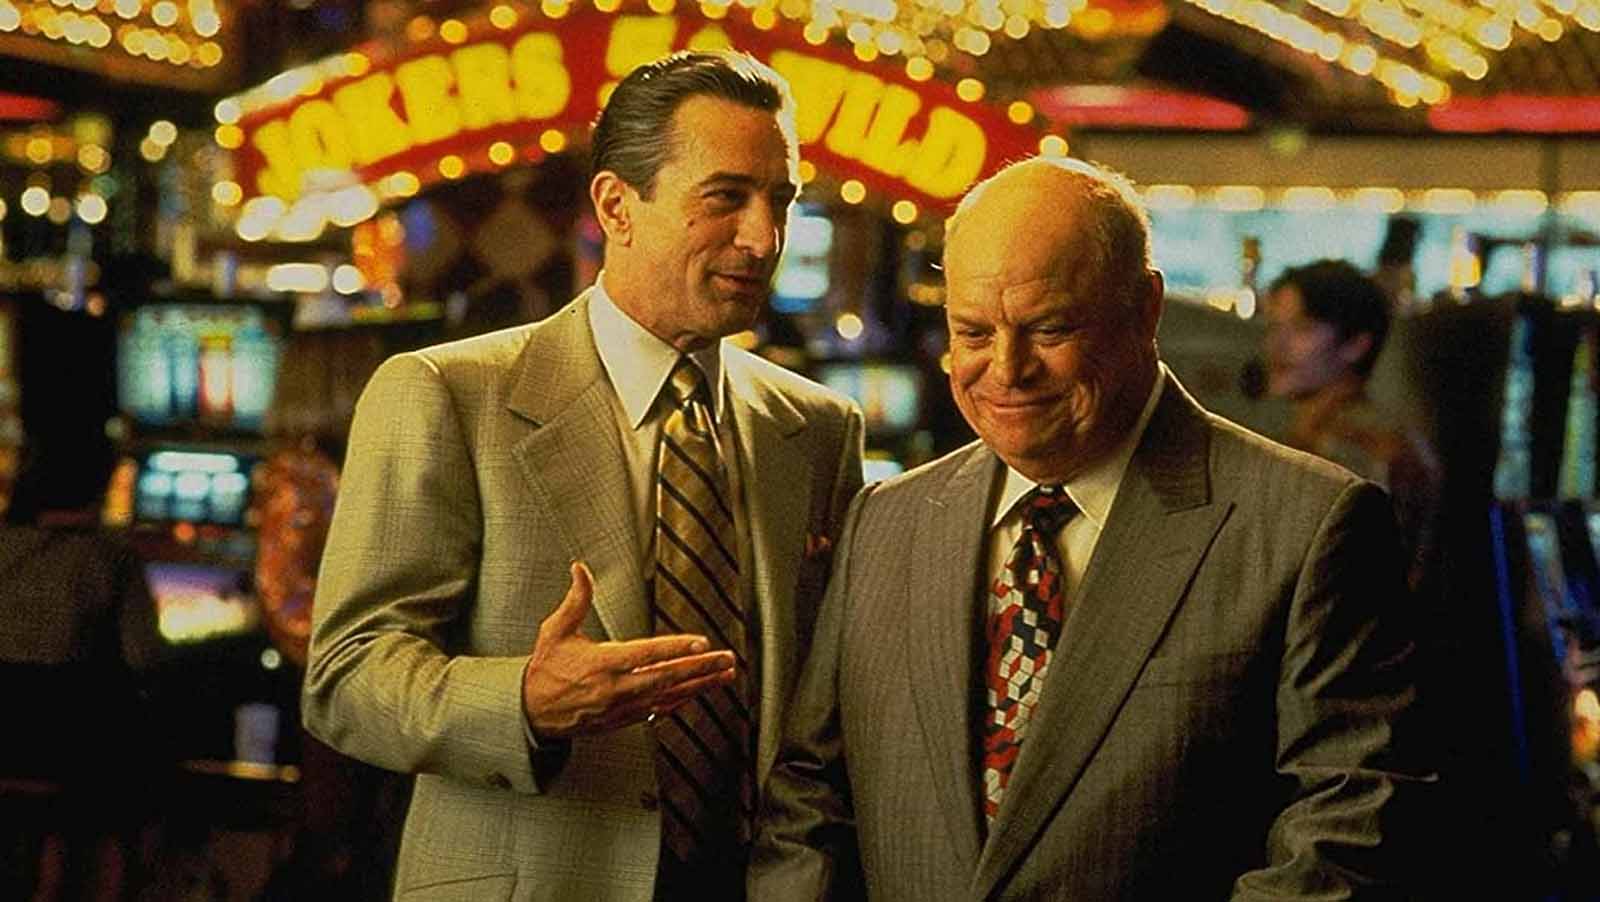 What Has Made Casino Scenes So Popular In Movies Over The Years?